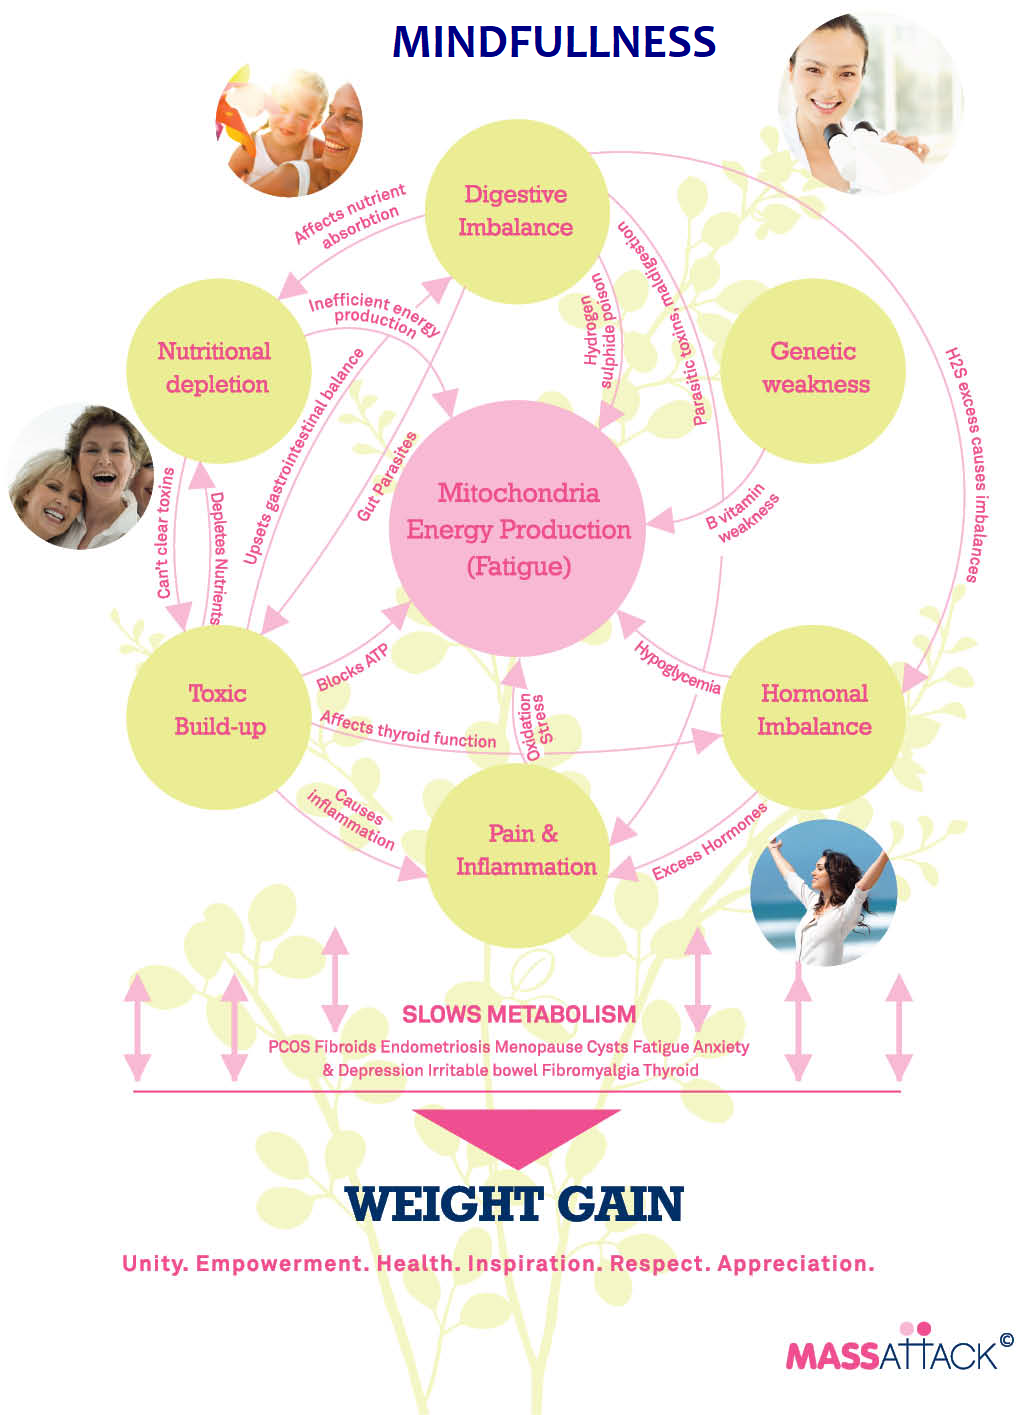 Weight loss program, weight loss program for women, weight loss program for PCOS, weight loss program for endometriosis, weight loss program for menopause, weight loss program for PCOS, weight loss, lose weight, quick, fast, hormones, women, female, secrets, tips, natural, slow metabolism